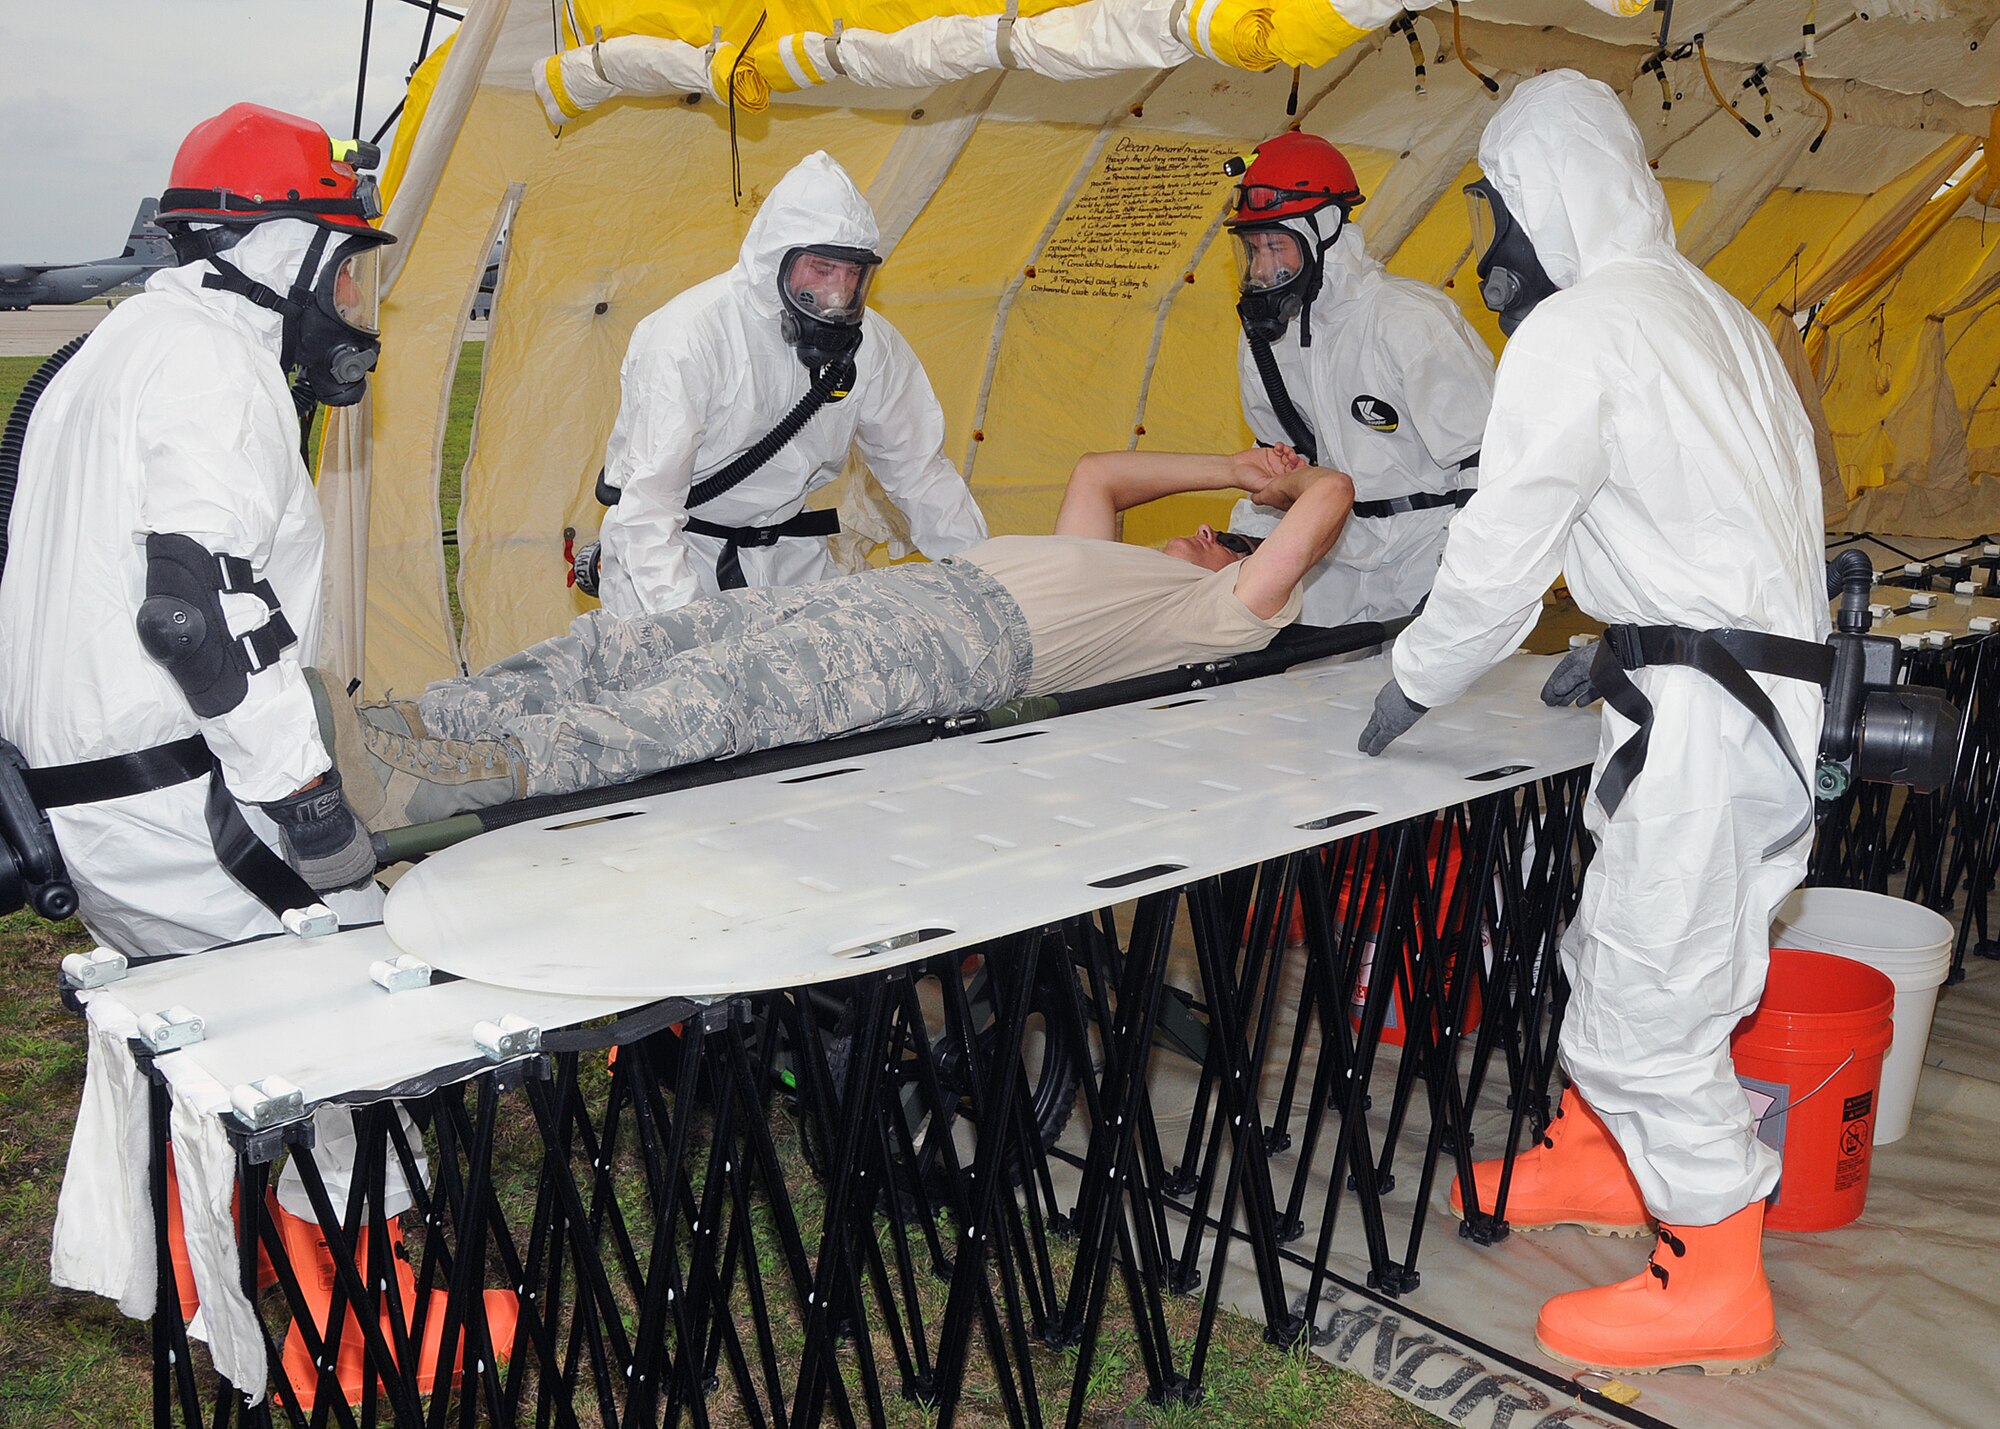 Members of the 143d Airlift Wing involved in the Region 1 Chemical, Biological, Radiological, Nuclear, High Yield Explosive Enhanced Response Force Package (CERFP) perform a training exercise to demonstrate the team's responsibilities and capabilities to potential new members and leadership. Colonel Arthur Floru (on stretcher),143d AW commander volunteered to play a victim for the exercise. The Region 1 CERFP is made up of members of the Air and Army National Guard from Maine, New Hampshire, and Rhode Island. National Guard Photo by Master Sgt Janeen Miller (RELEASED)